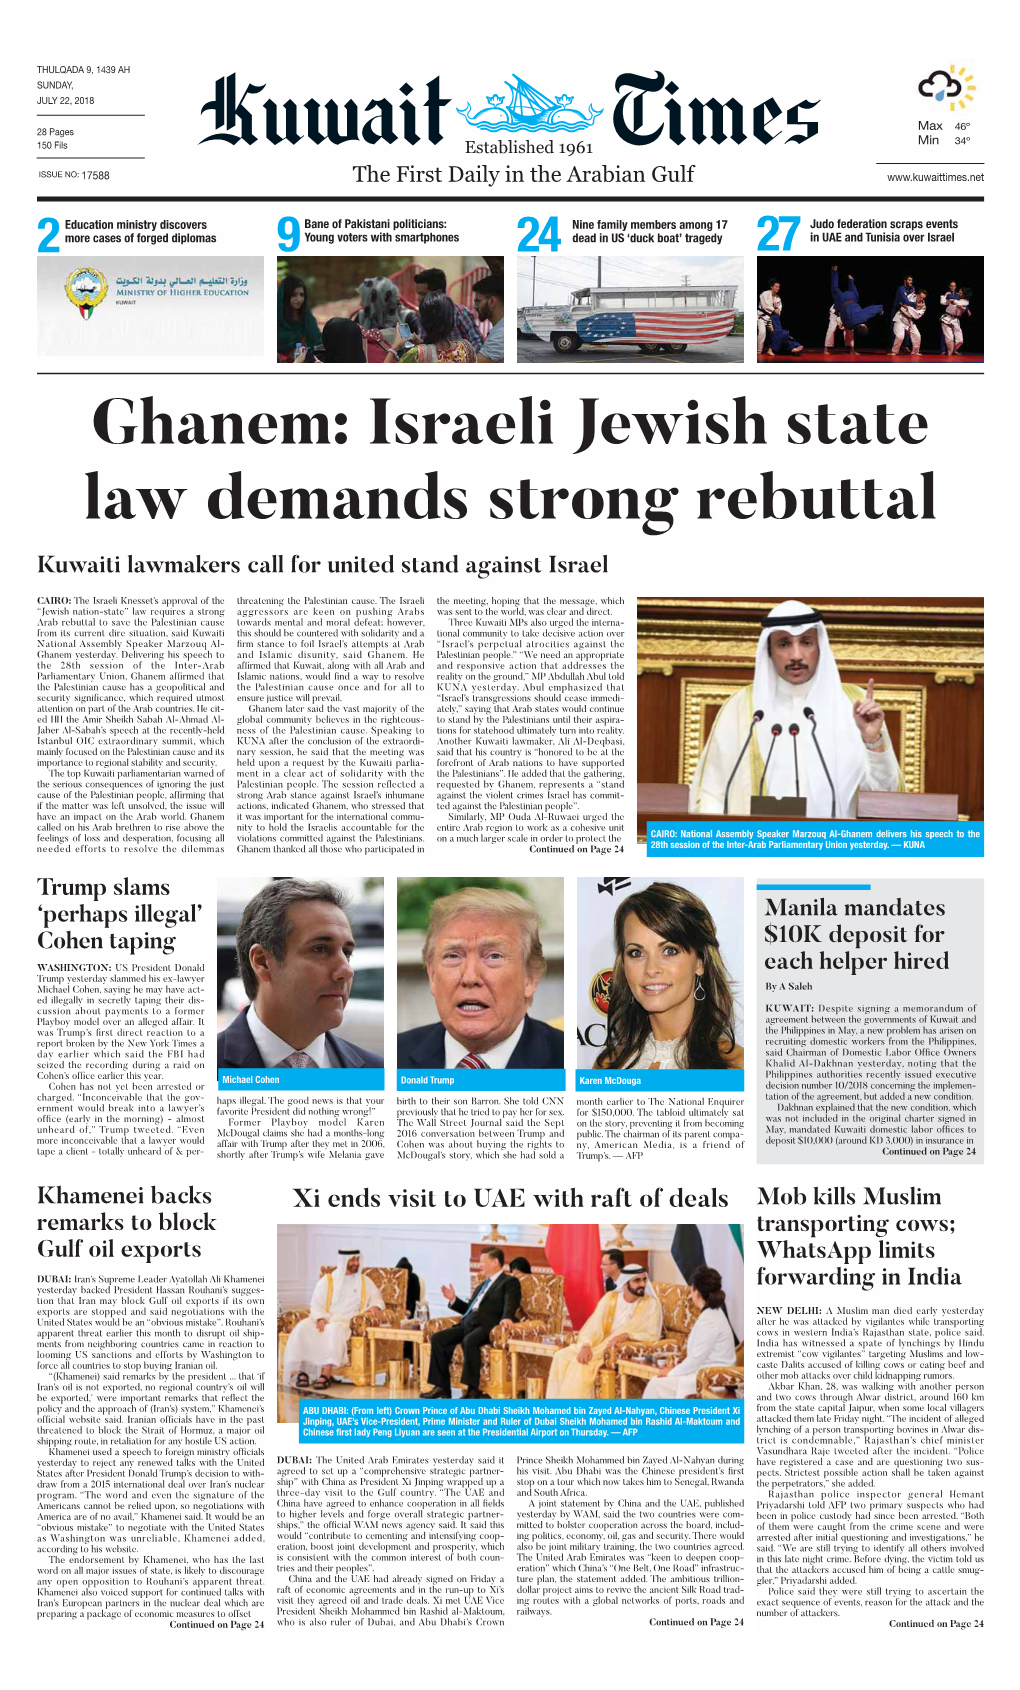 Israeli Jewish State Law Demands Strong Rebuttal Kuwaiti Lawmakers Call for United Stand Against Israel